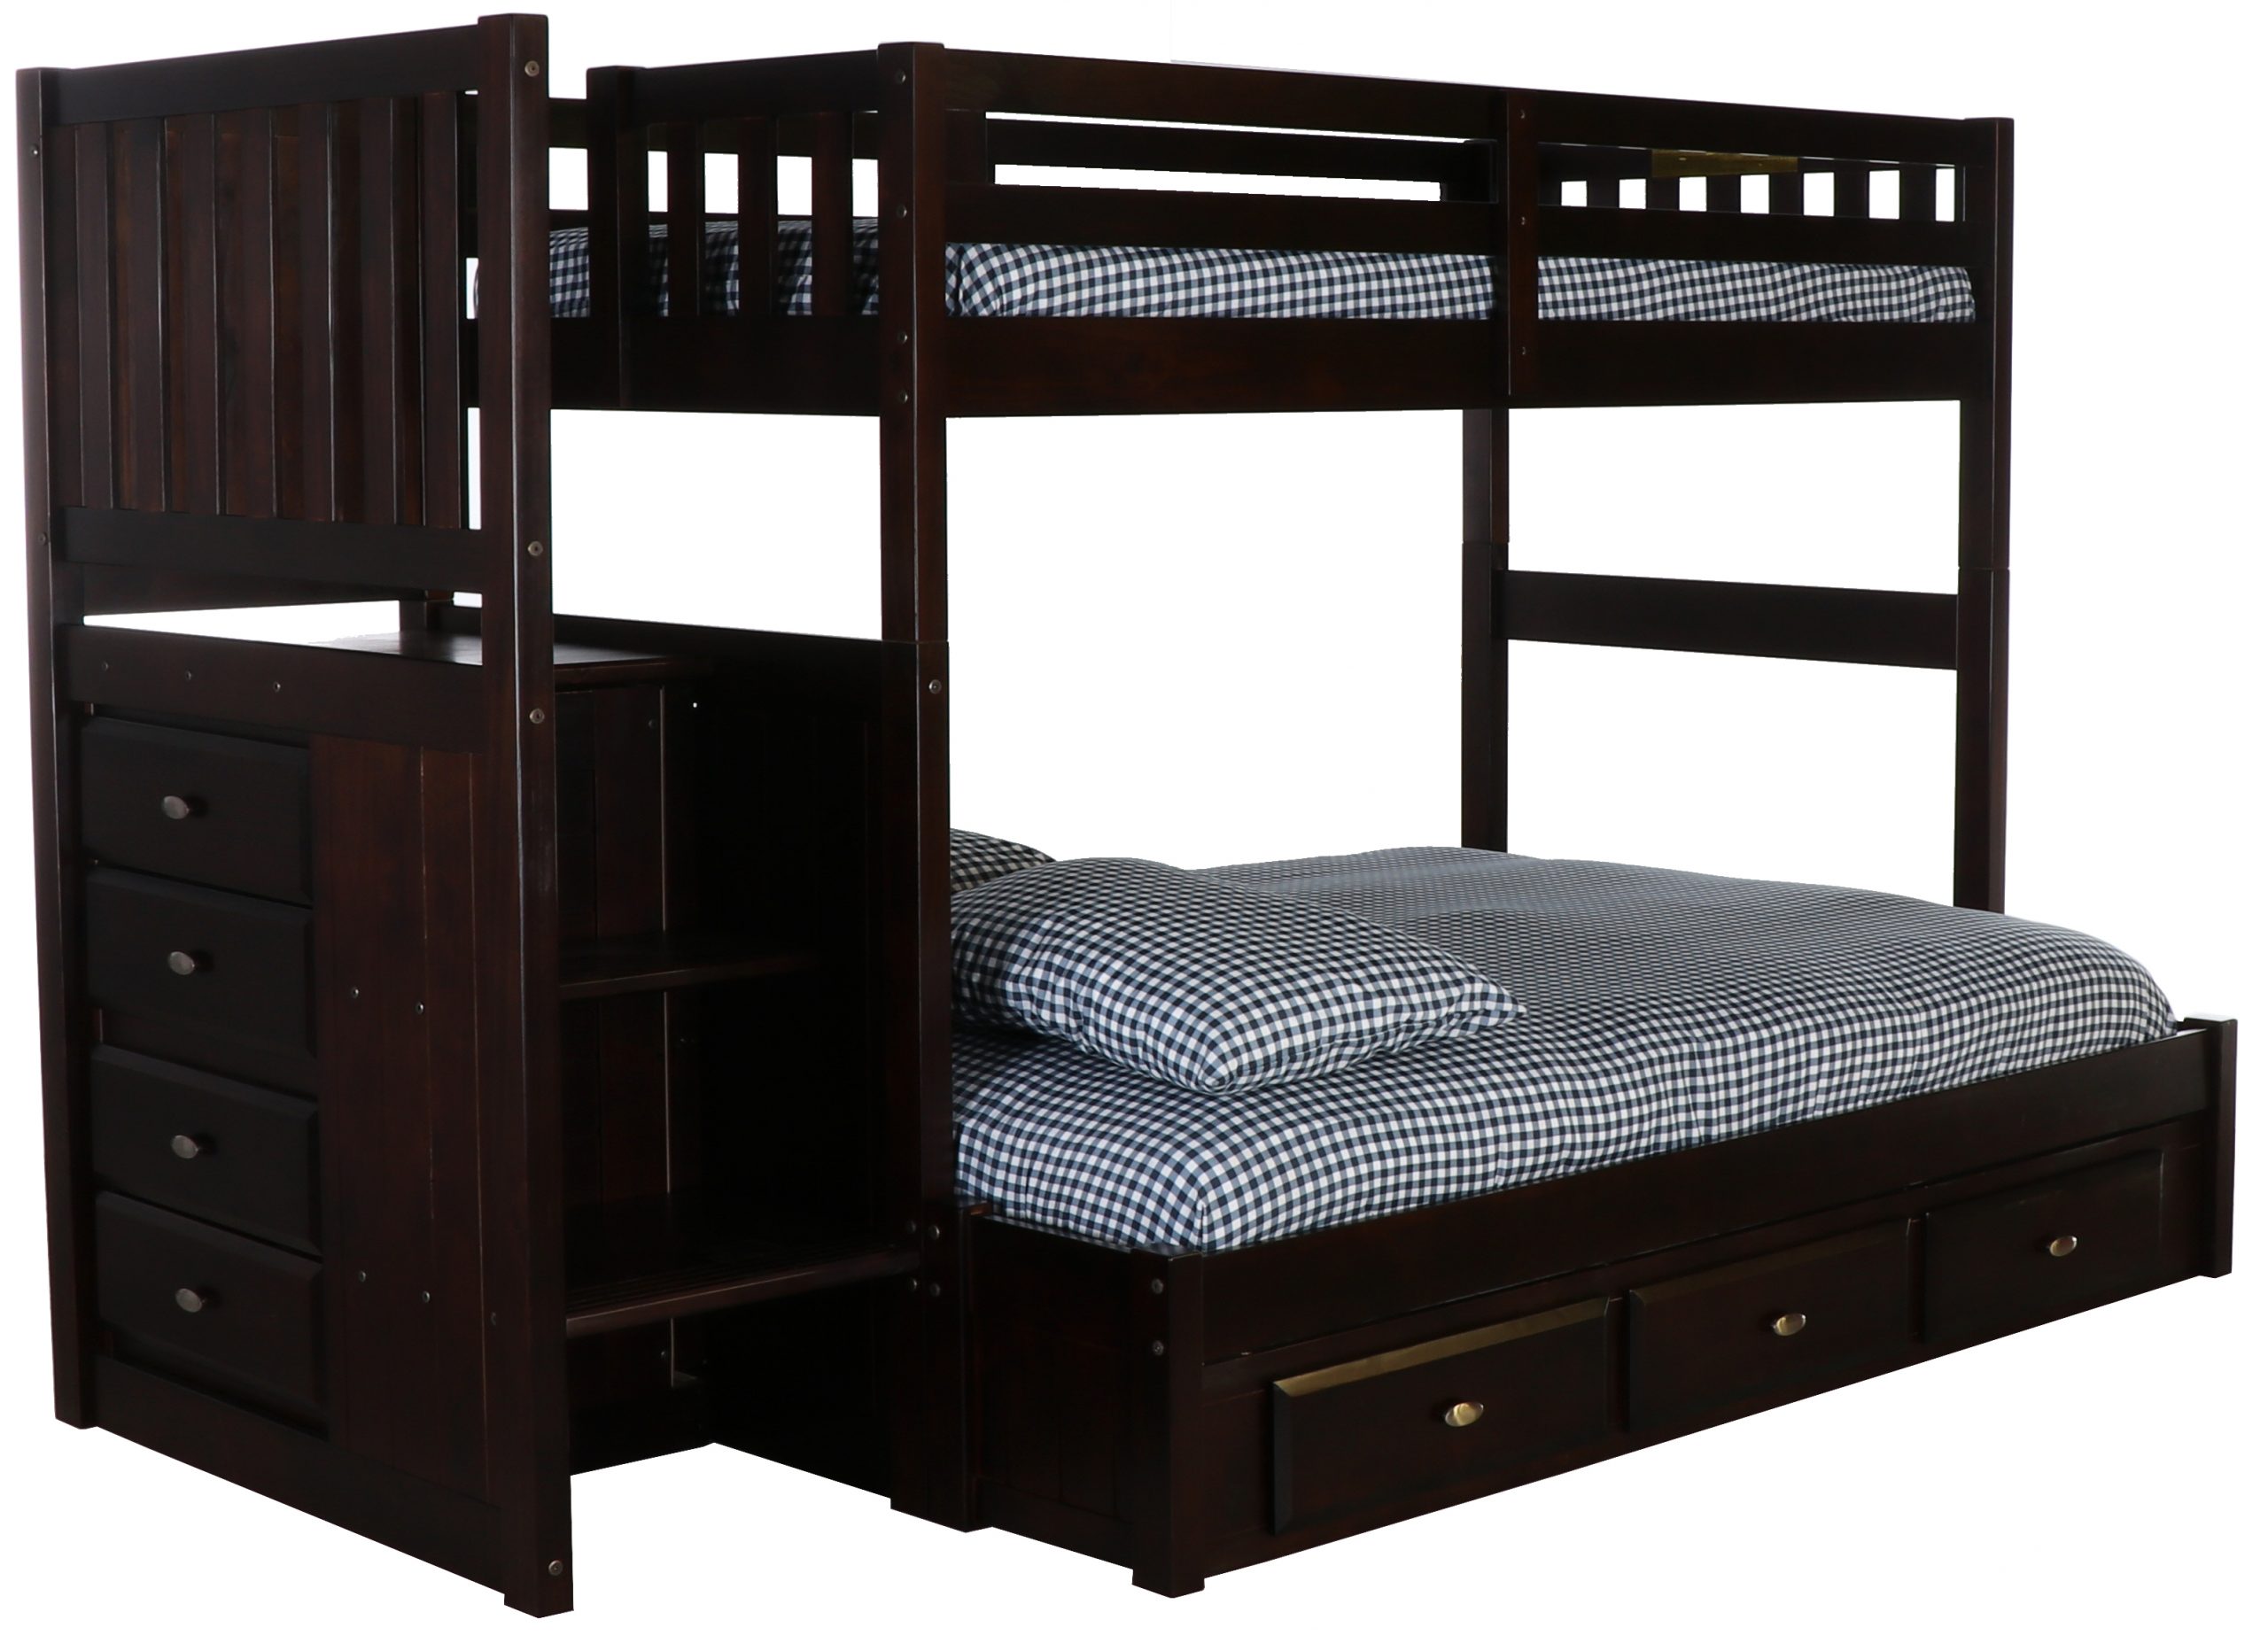 Full Espresso Staircase Bunk Beds, Wooden Bunk Beds Twin Over Full With Stairs